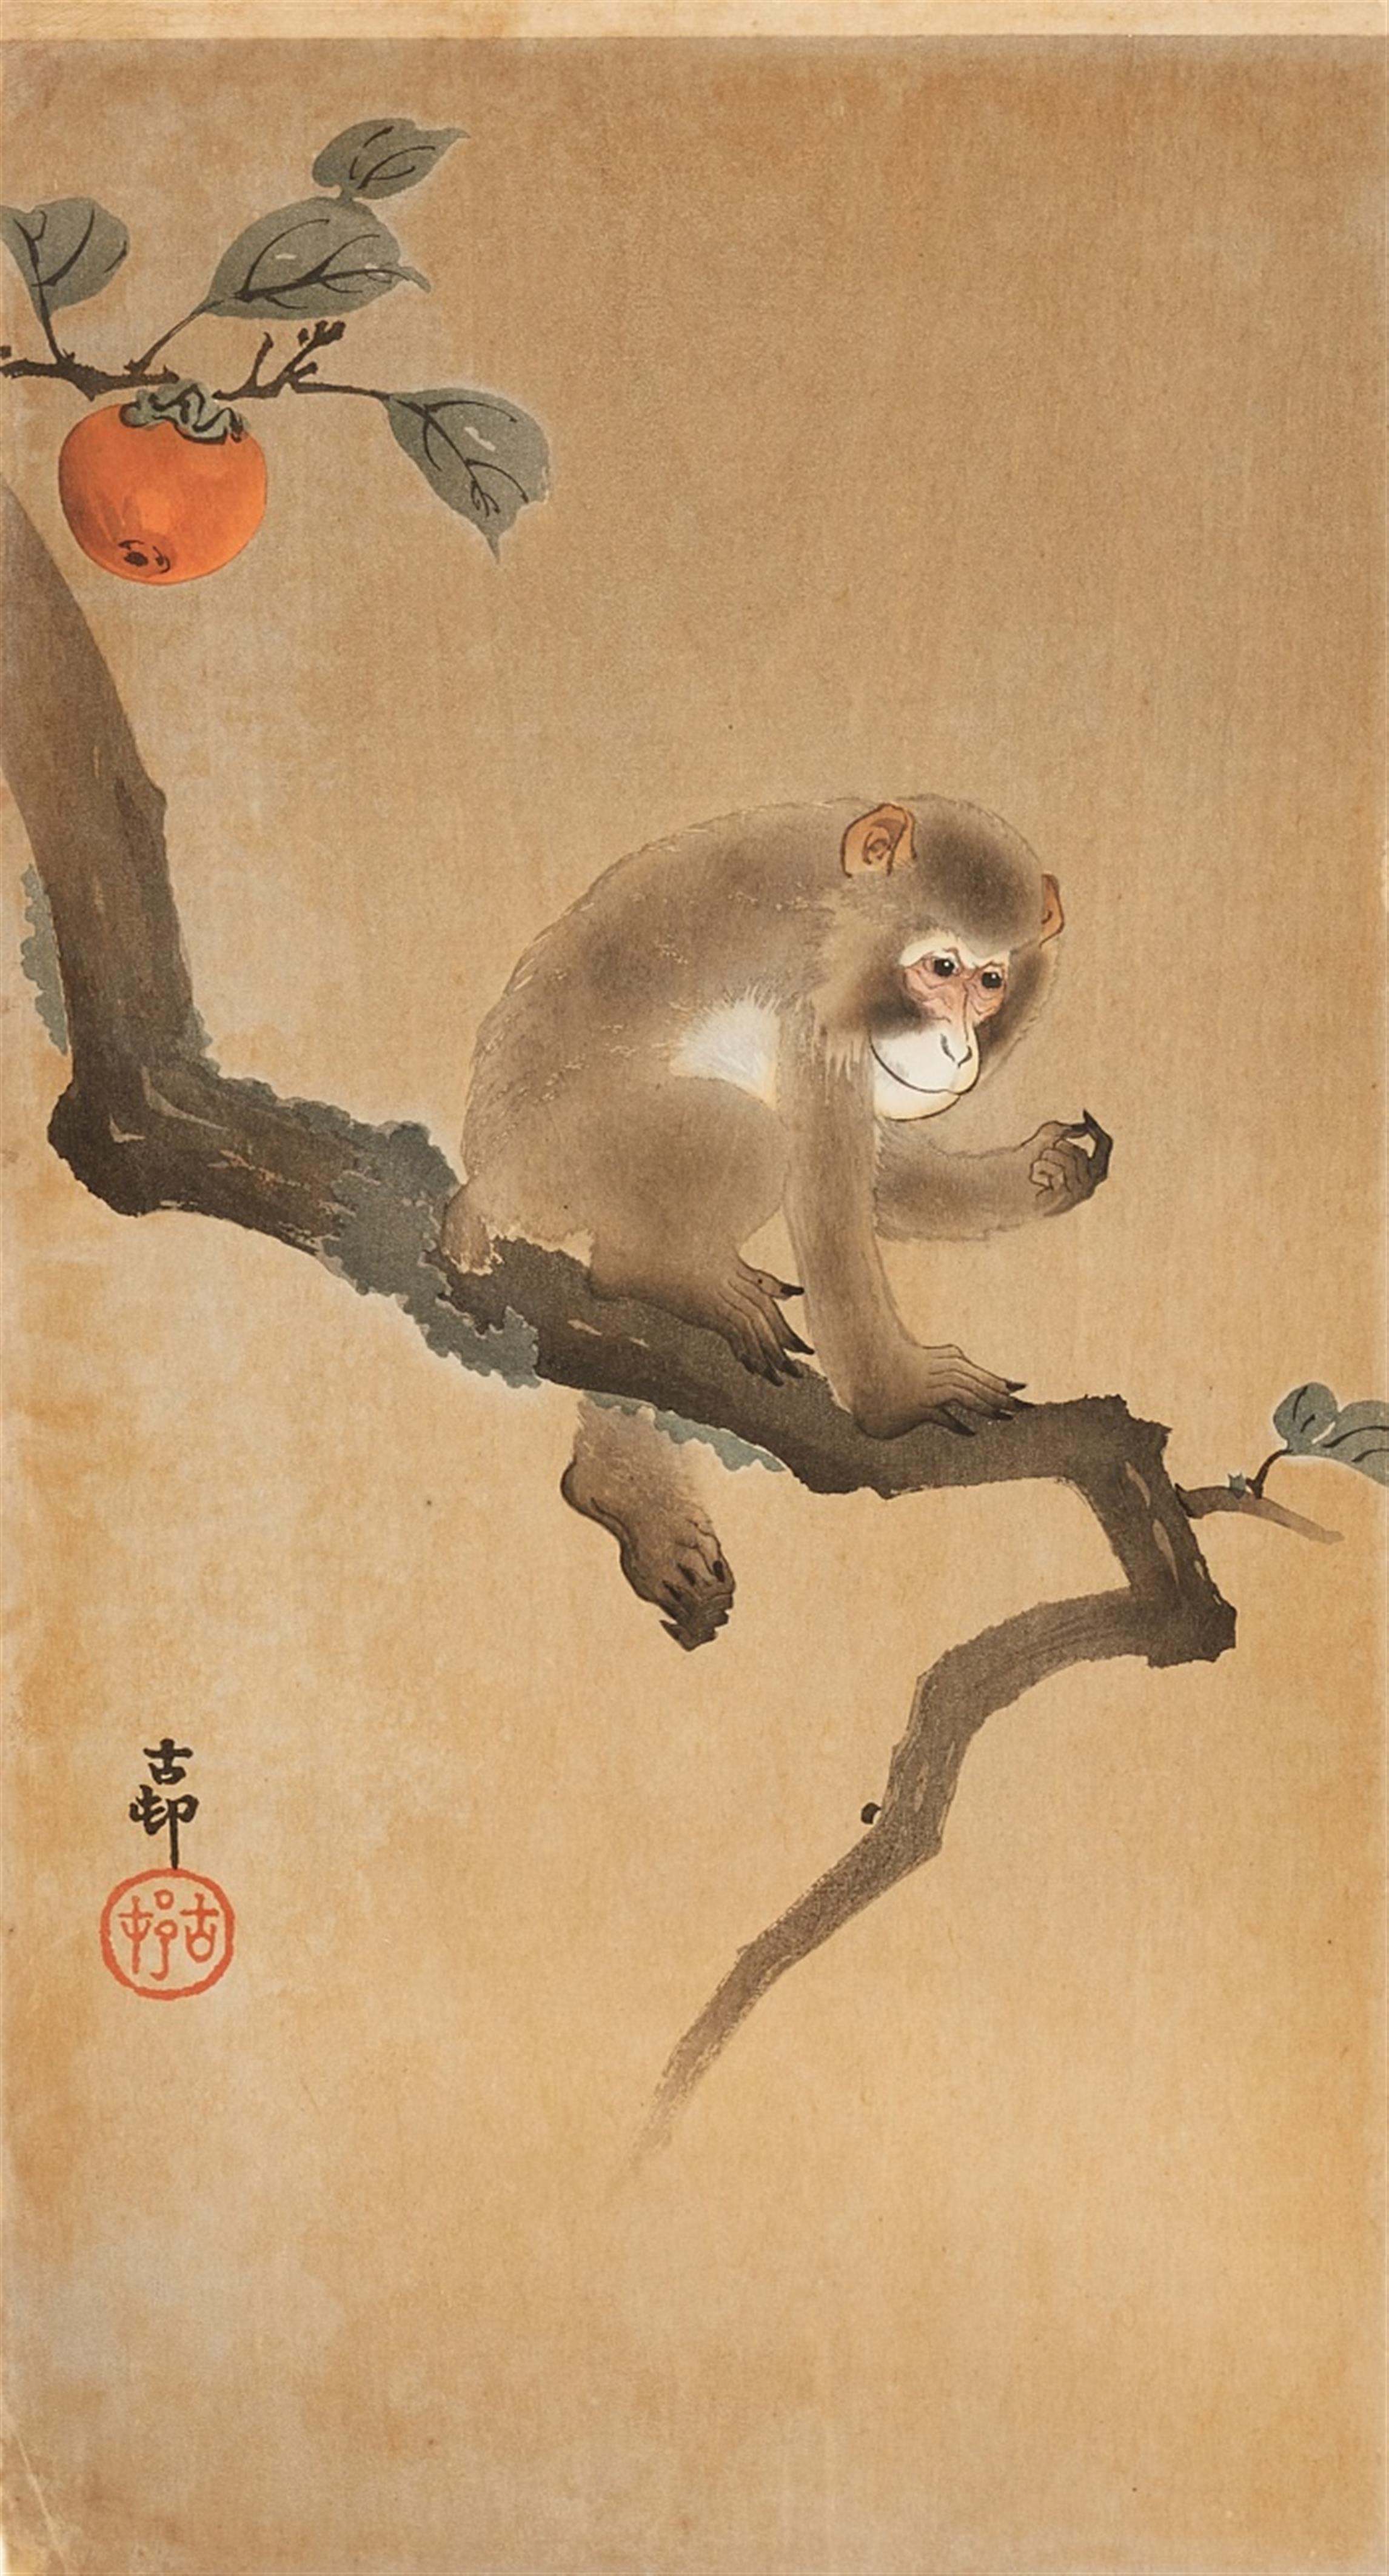 Ohara Shoson - Two ôtanzaku. Published by Daikokuya circa 1910-1920. a) Owl and moon sickle. Seal: Koson. Somewhat later edn. b) Monkey in persimmon tree. Signed: Koson. Seal: Koson. (2)

Go... - image-2